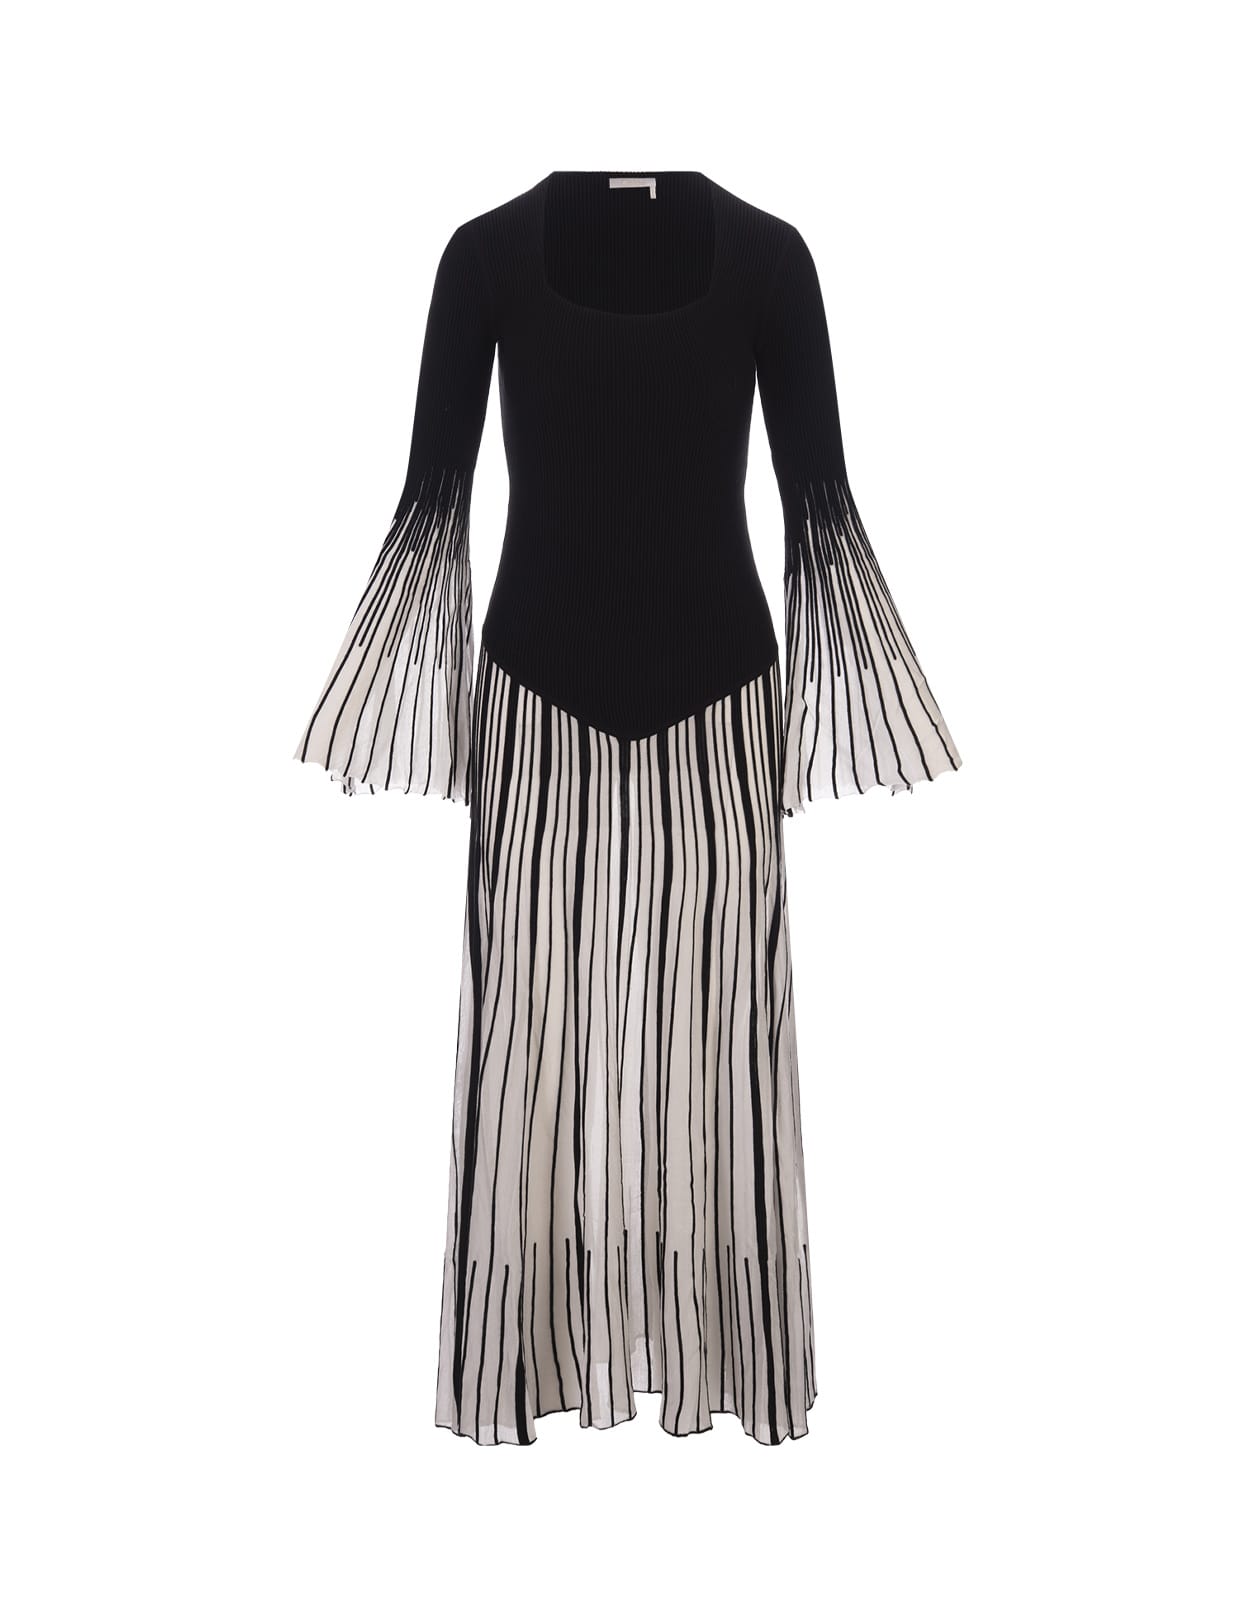 CHLOÉ BLACK AND WHITE KNITTED LONG DRESS